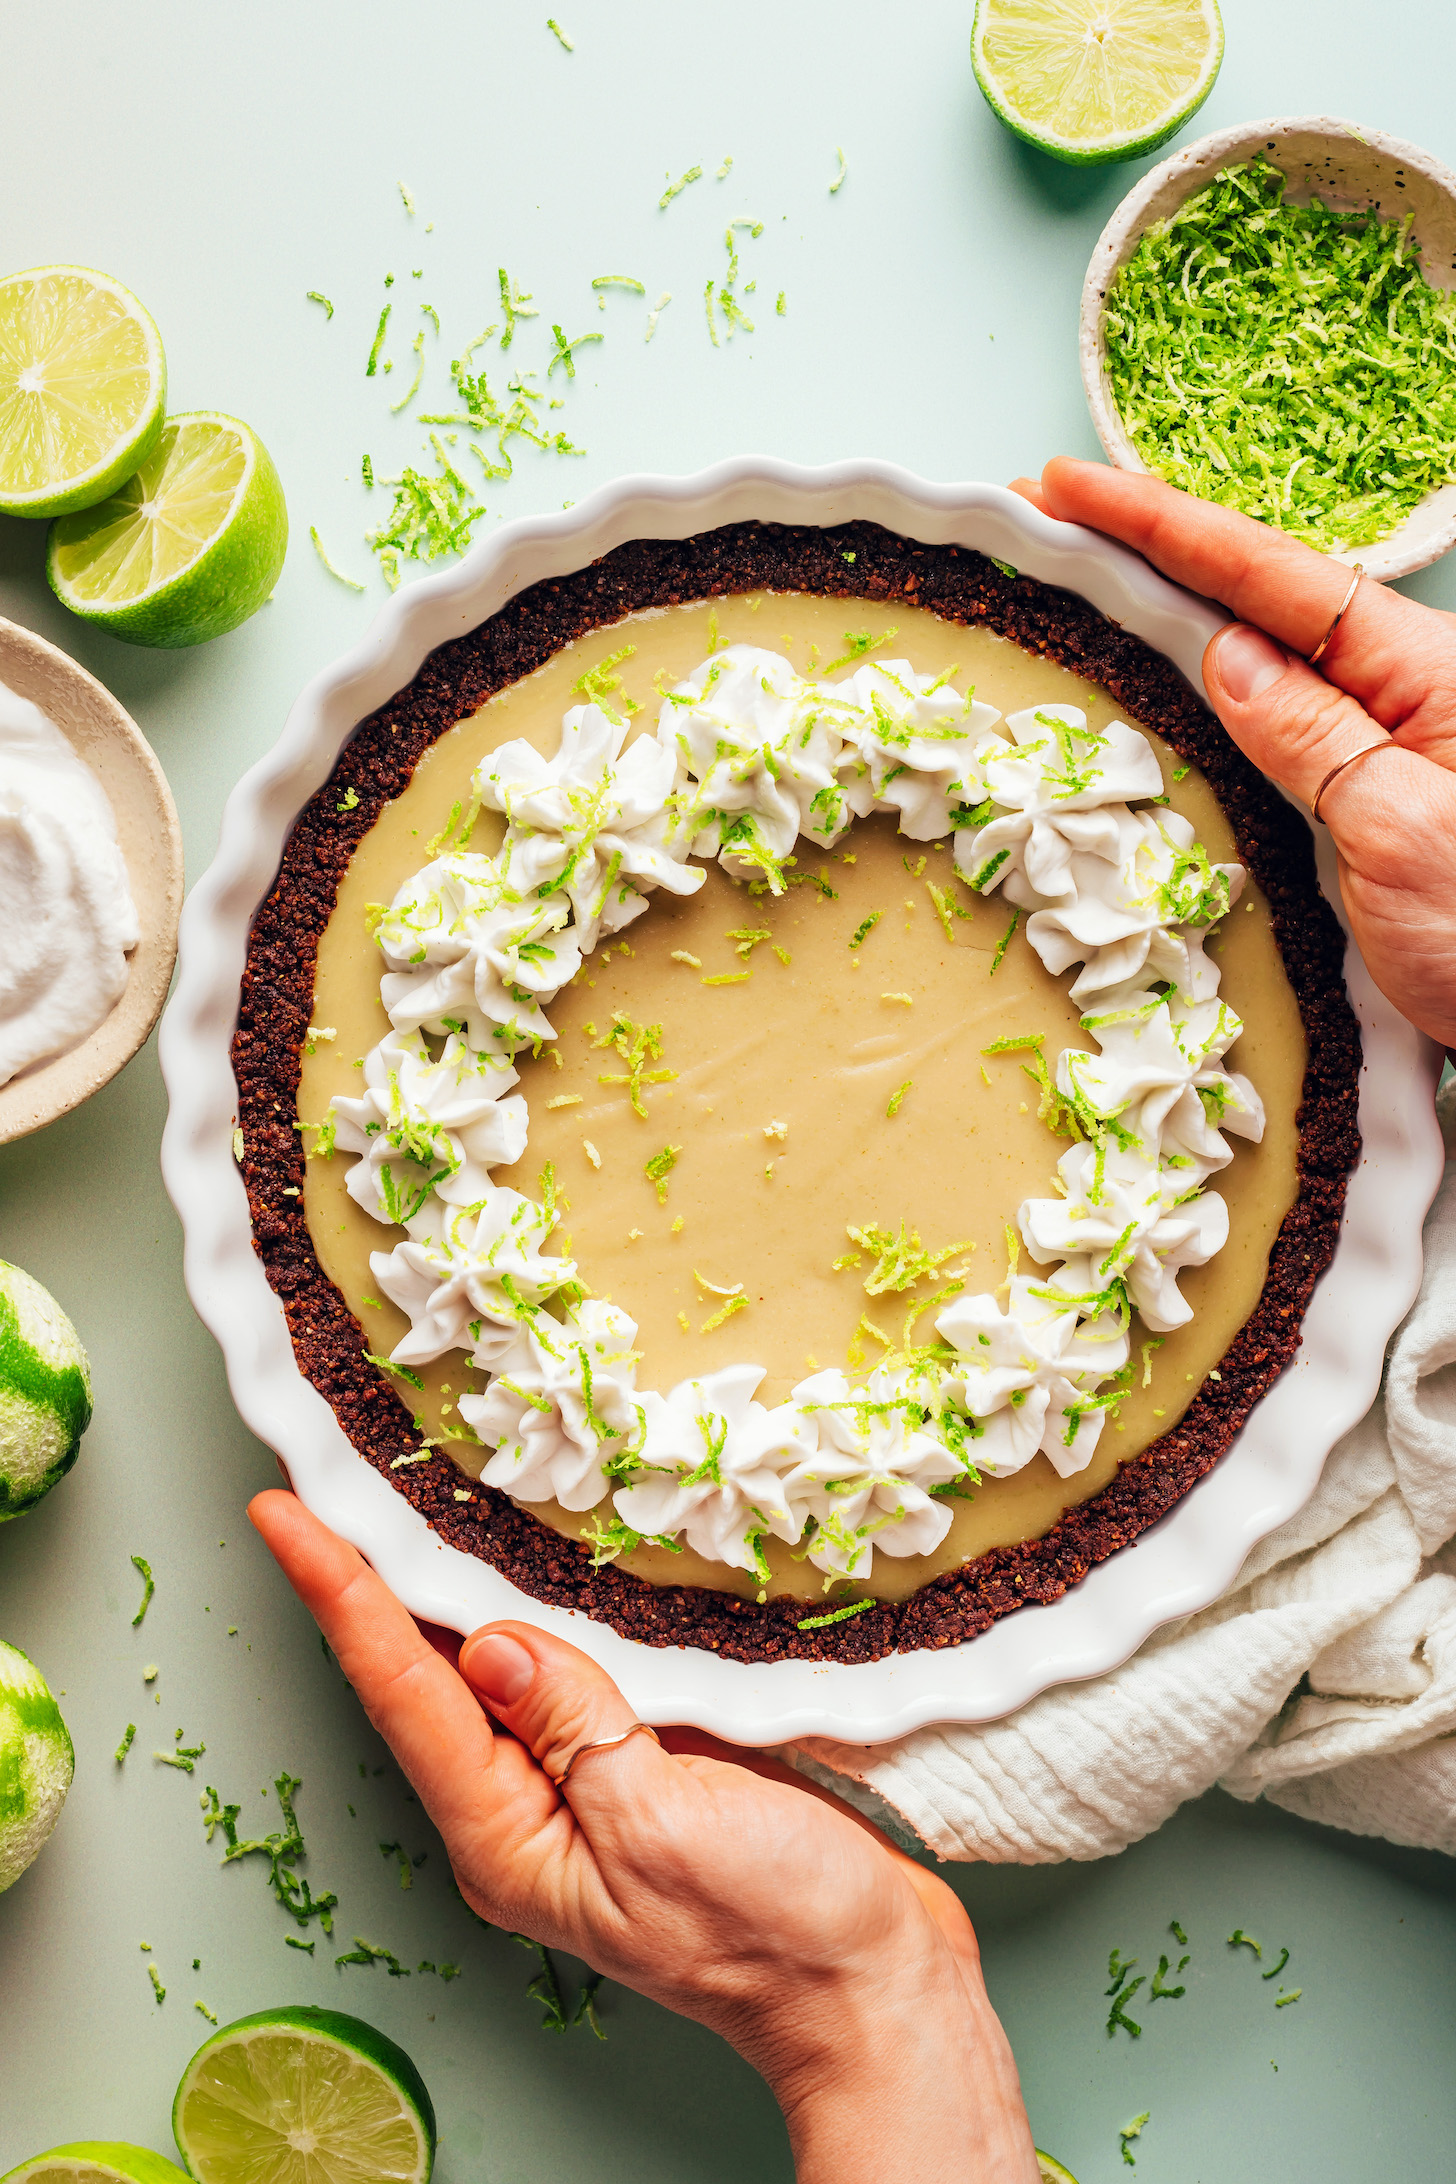 Hands holding the sides of a pie pan filled with a vegan key lime pie with a gluten-free graham cracker crust